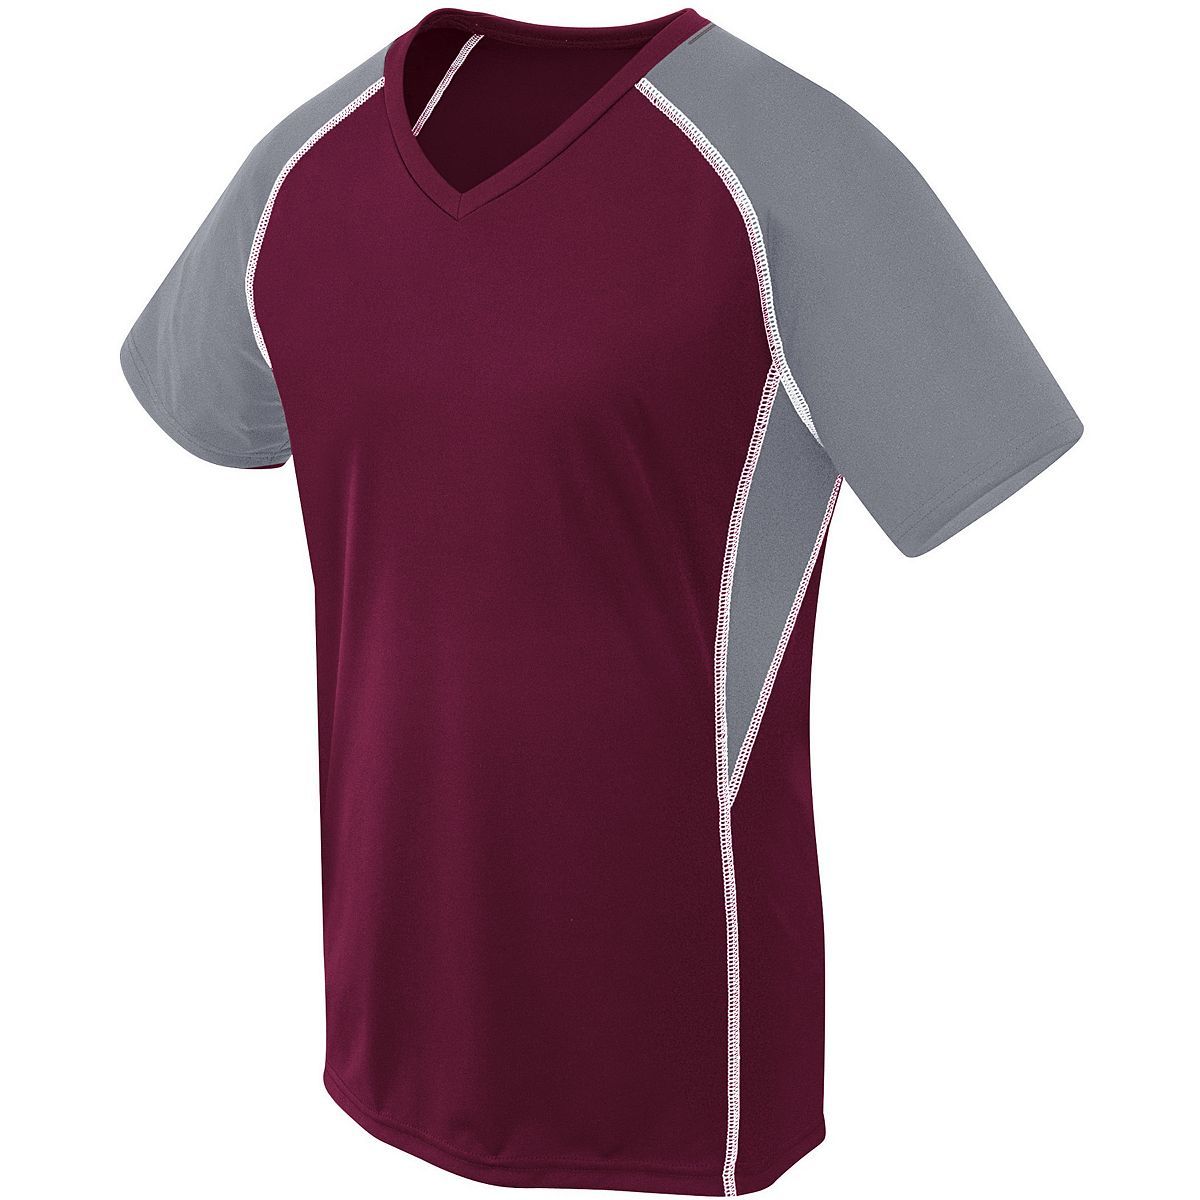 High 5 Girls Evolution Short Sleeve in Maroon/Graphite/White  -Part of the Girls, High5-Products, Shirts product lines at KanaleyCreations.com